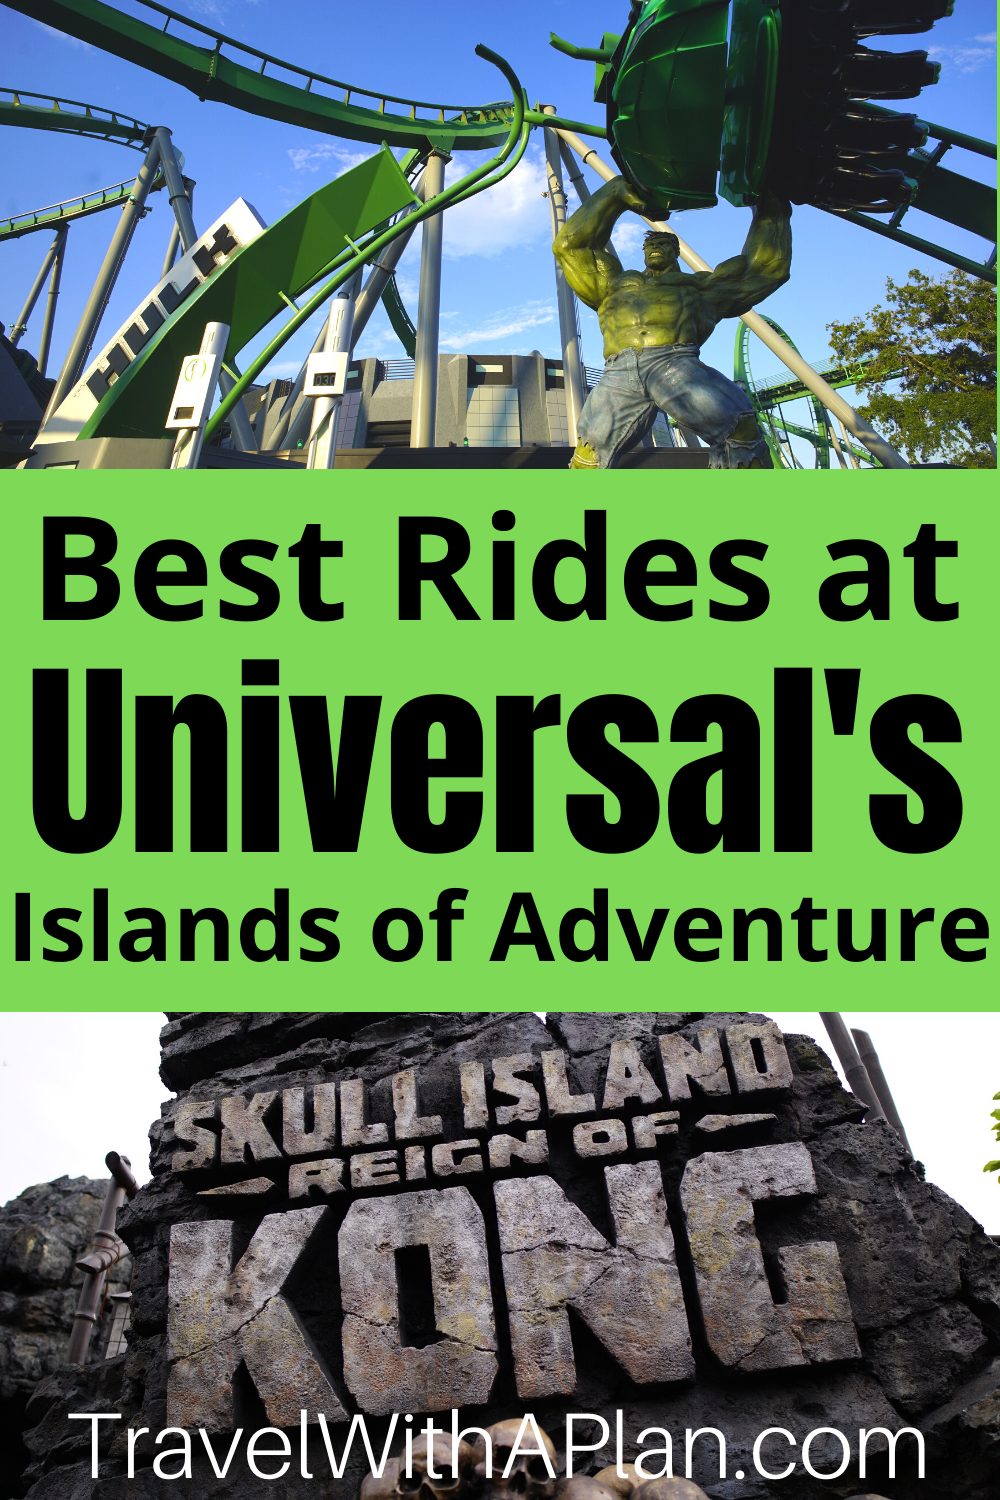 Top U.S. Family Travel Blog, Travel With A Plan, lets you in on the Top 7 Best Rides at Islands of Adventure.  Rated the #1 Theme Park in the world, Universal's Islands of Adventure provides an epic ride experience!  #islandsofadventuretoprides #bestridesatislandsofadventure #topridesatislandsofadventure #islandsofadventurerides #bestridesatUniversalOrlando